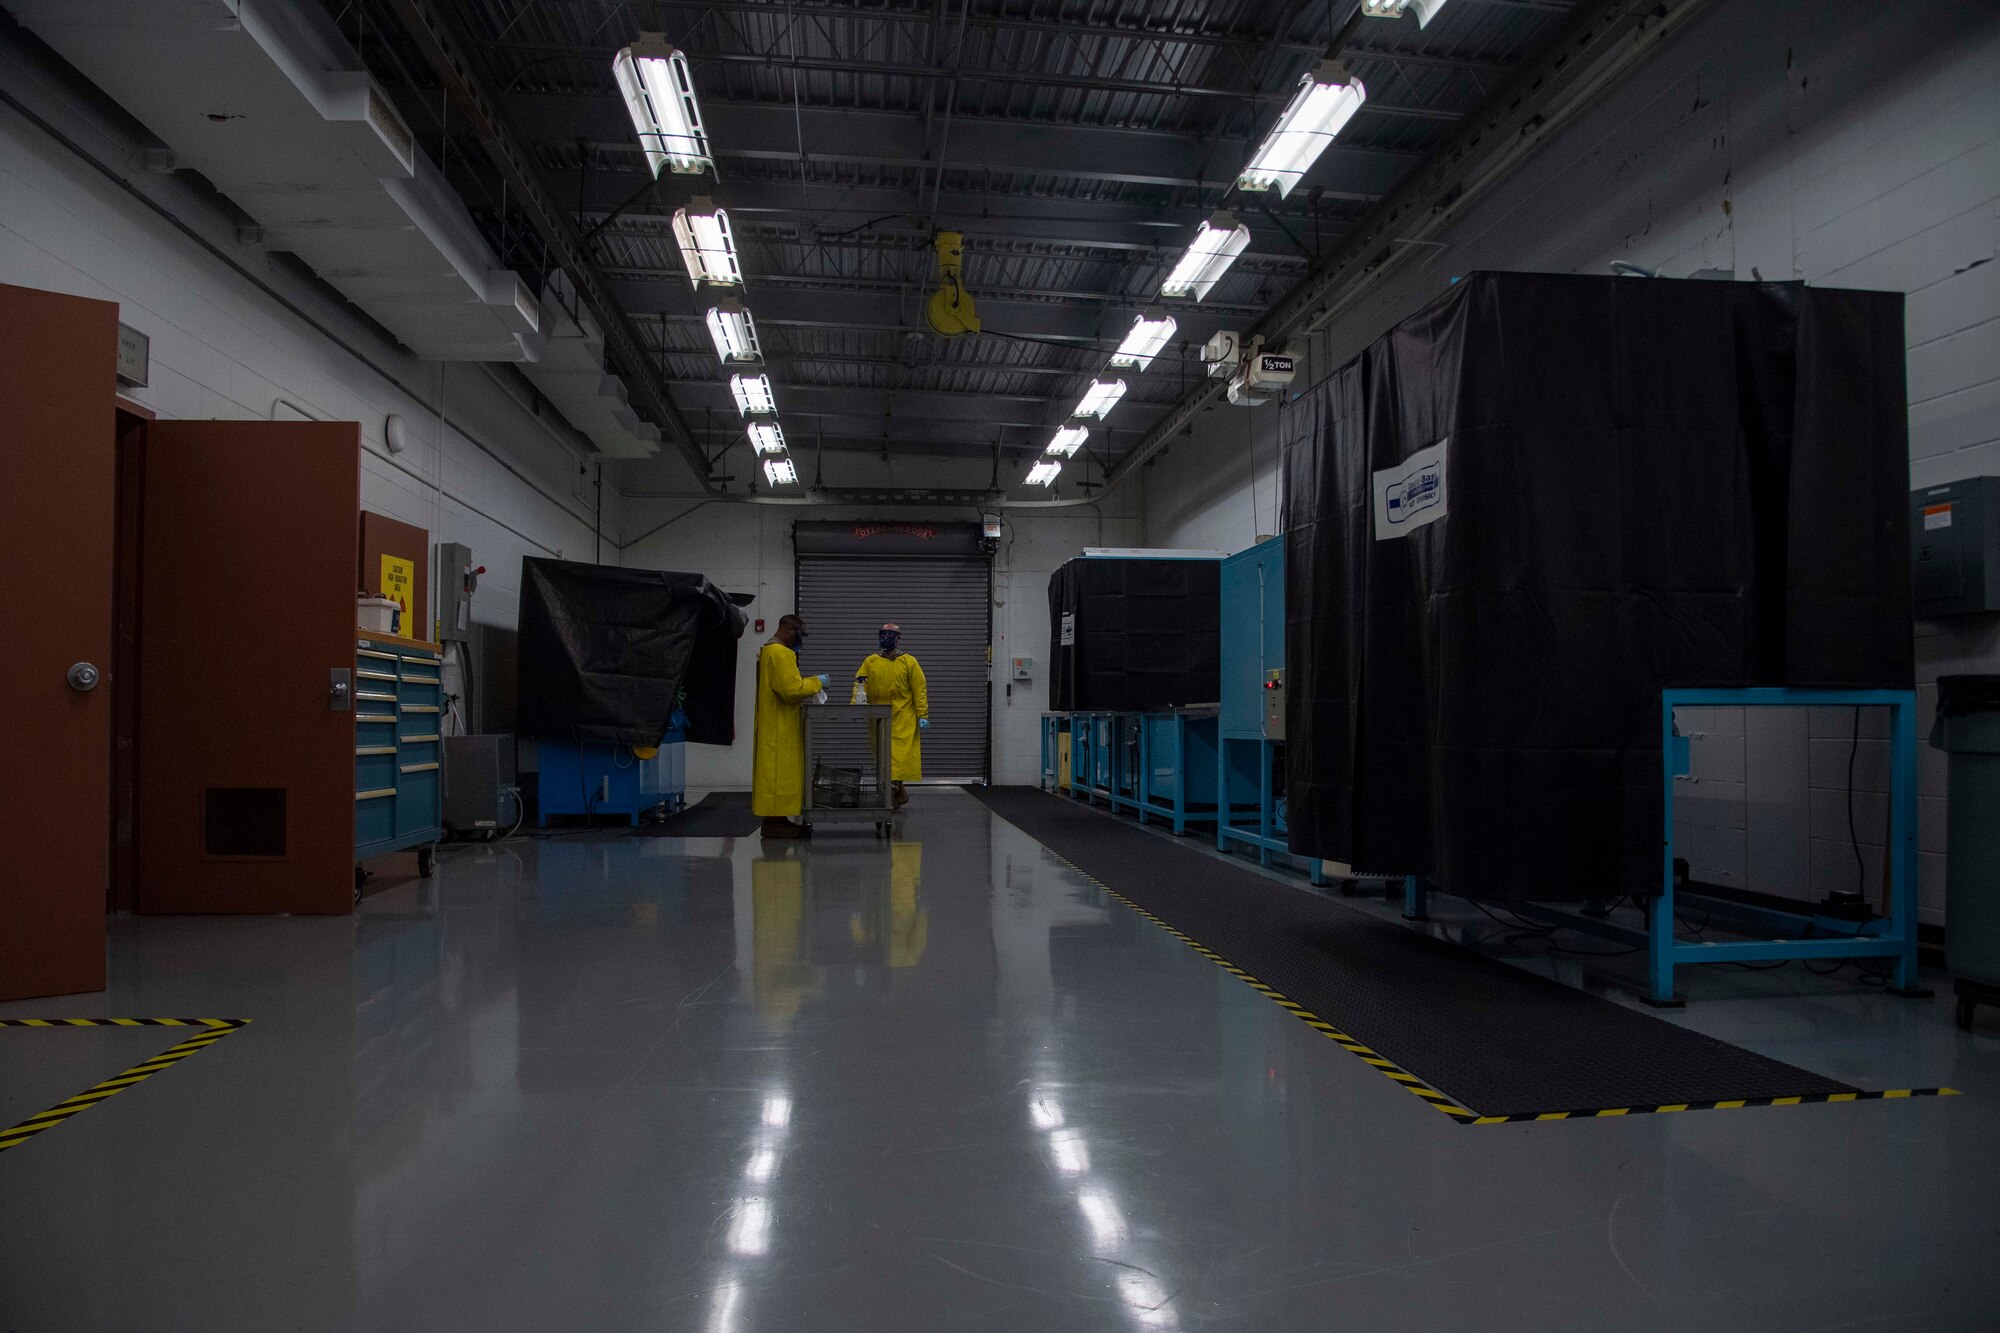 Maintainers with the 6th Maintenance Squadron nondestructive inspections (NDI) unit prepare to perform a liquid penetrant inspection at MacDill Air Force Base, Florida, June 4, 2021.